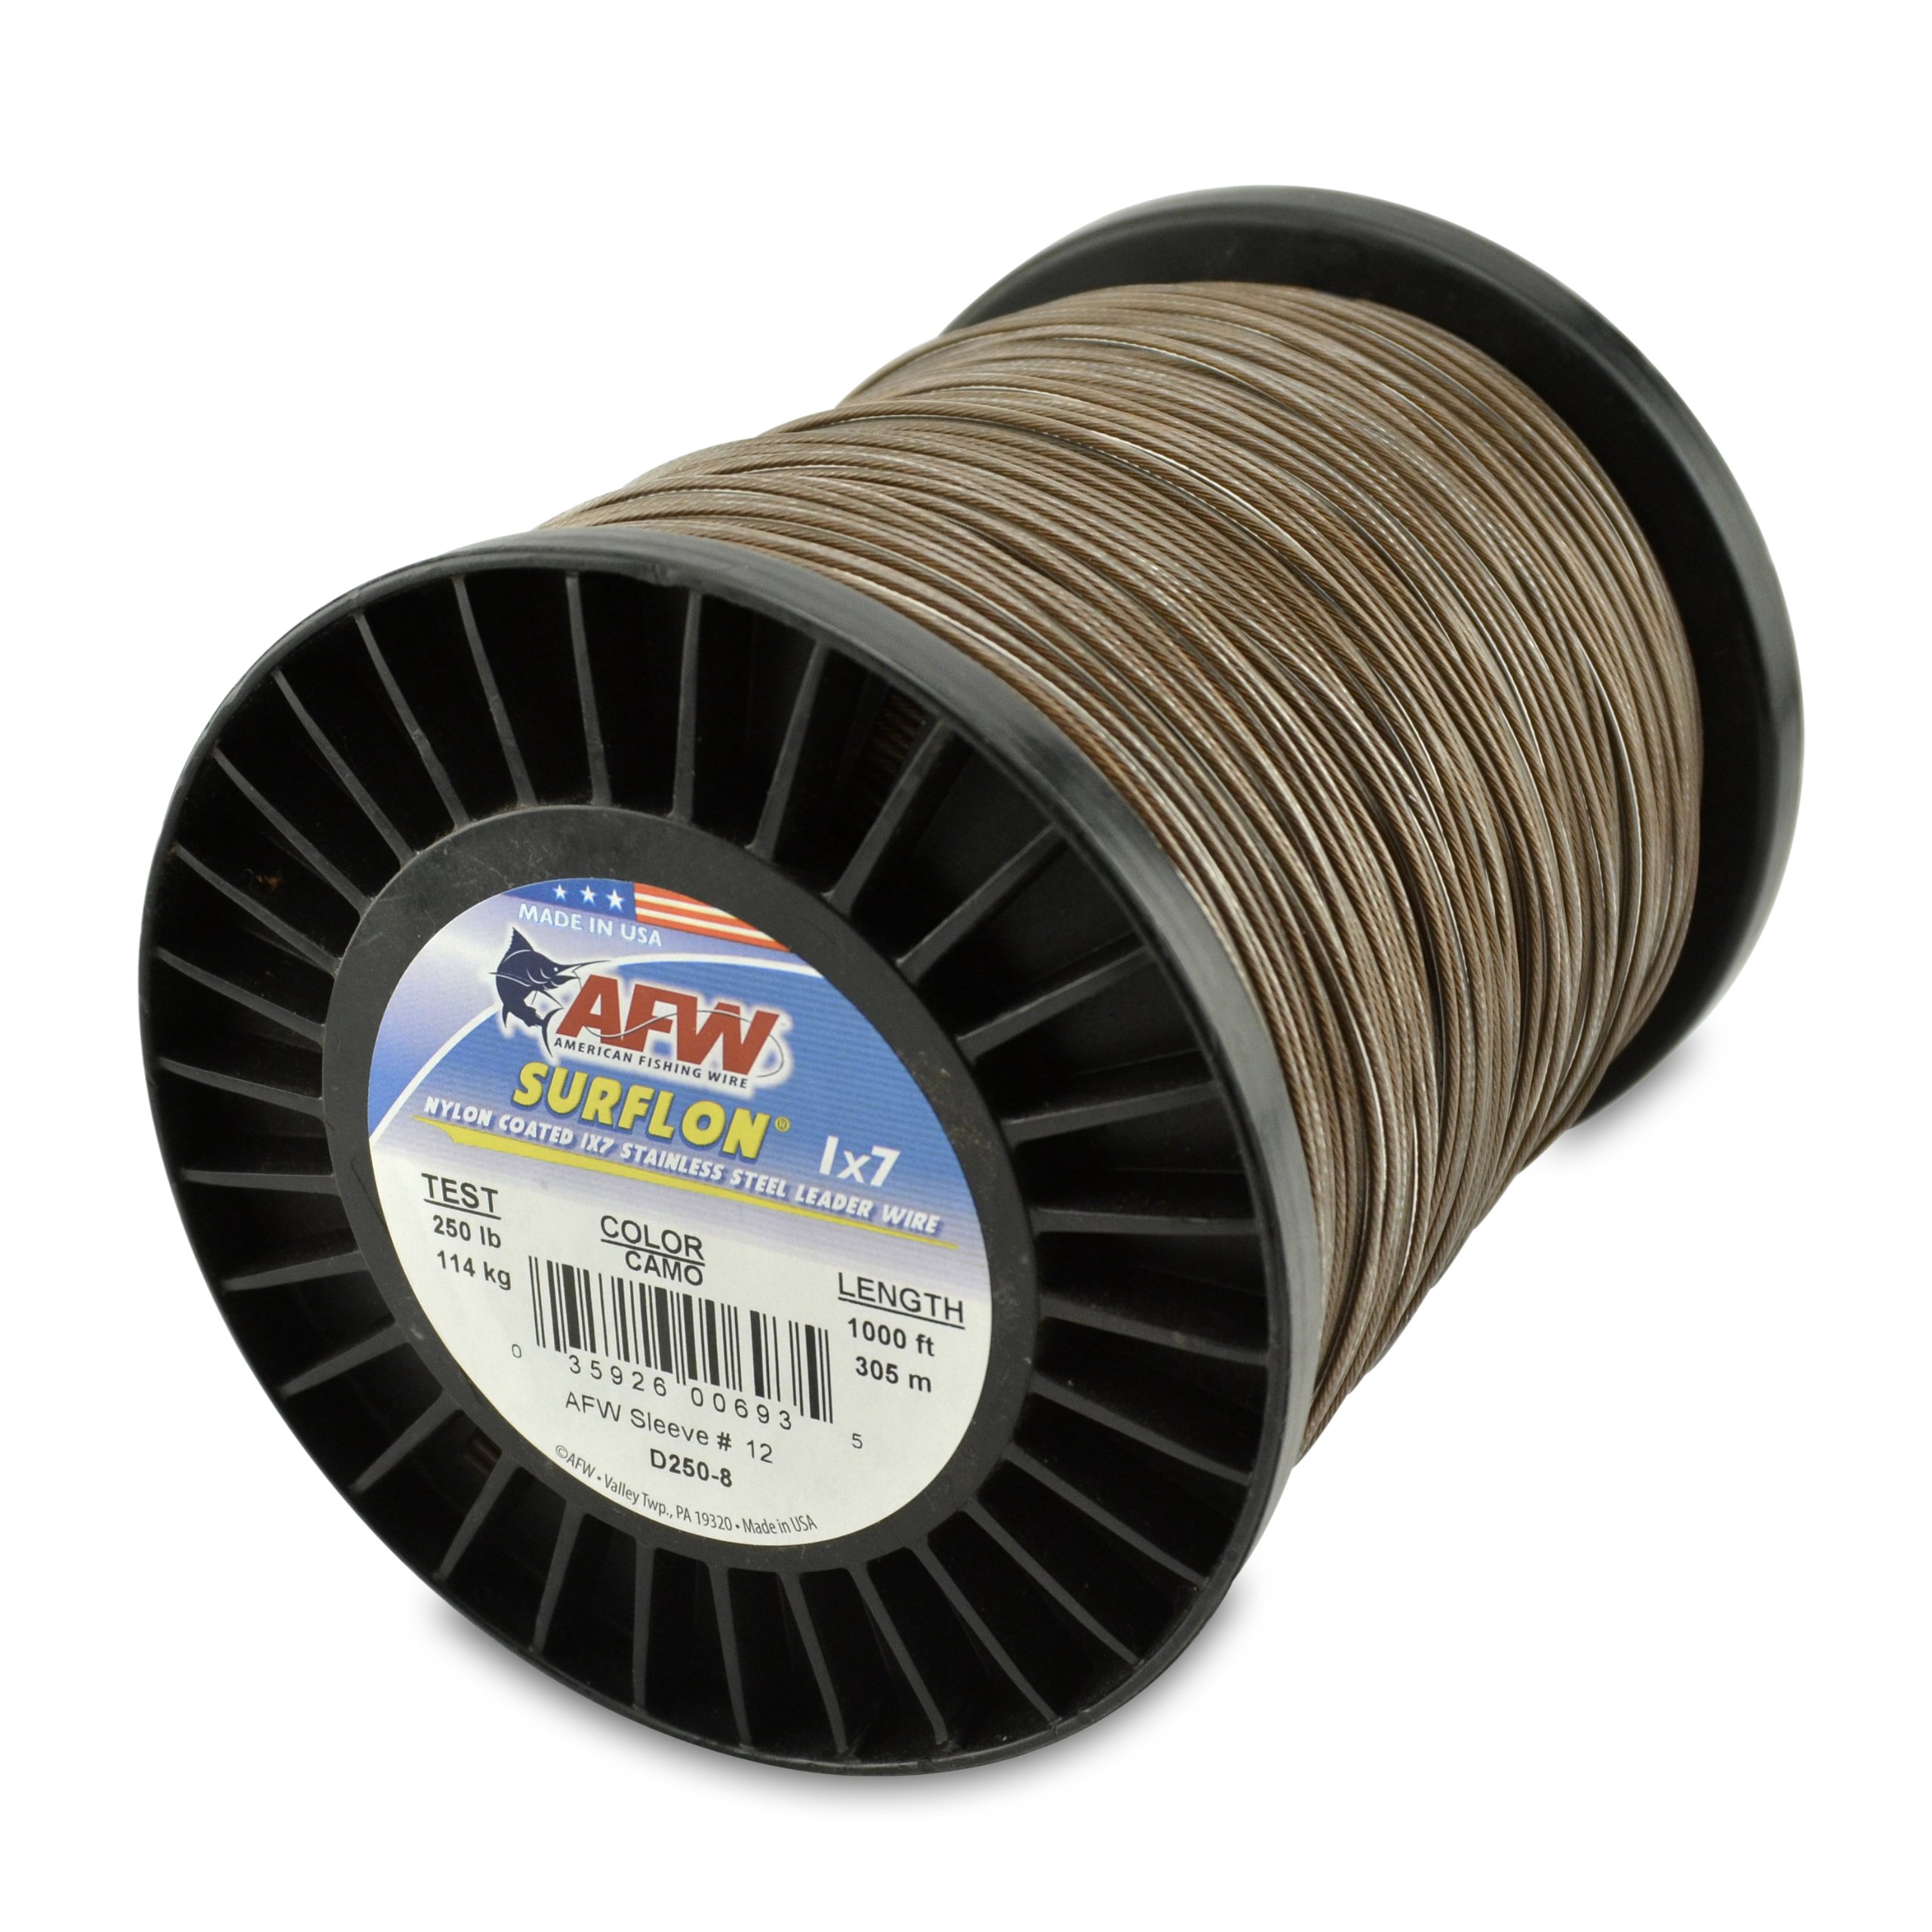 Abundant Flow Water Systems American Fishing Wire Surflon Nylon Coated 1X7 Stainless Steel Leader Wire, Camo Brown Color, 170 Pound Test, 30-Feet